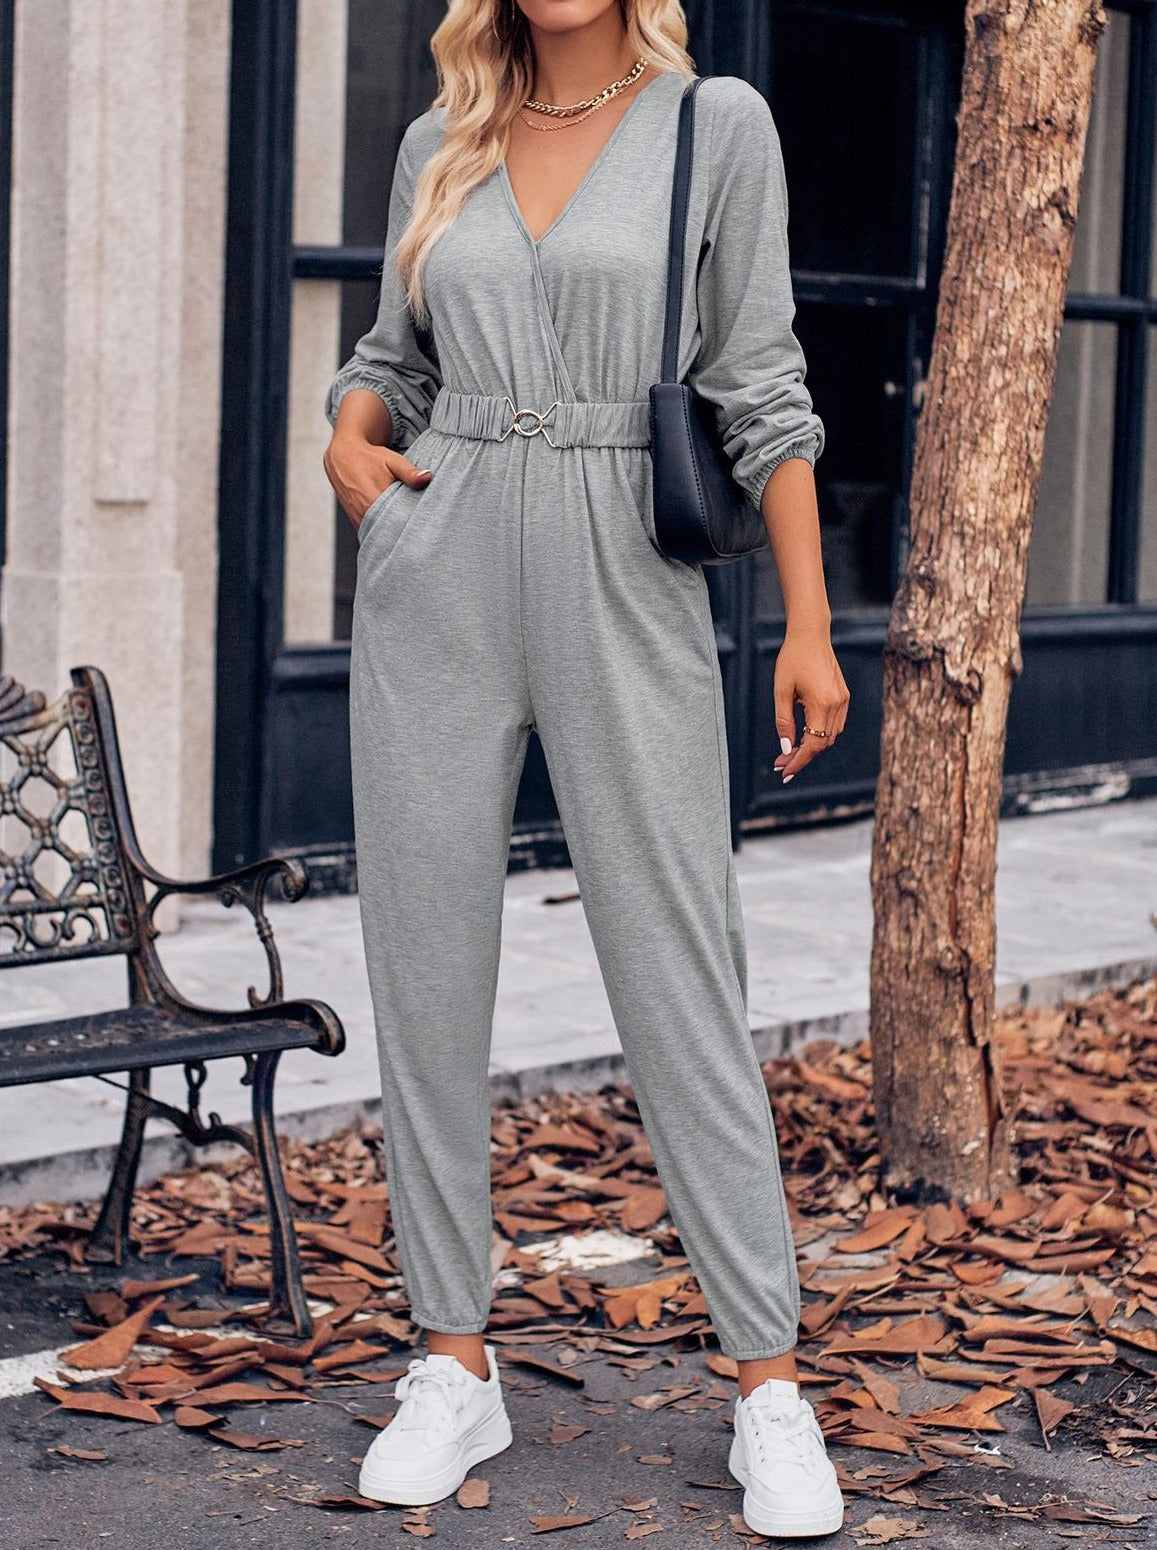 mysite Flecking gray / L European and American autumn and winter new 2023 women's clothing independent station foreign trade casual V-neck V-neck long-sleeved belt waist jumpsuit for women